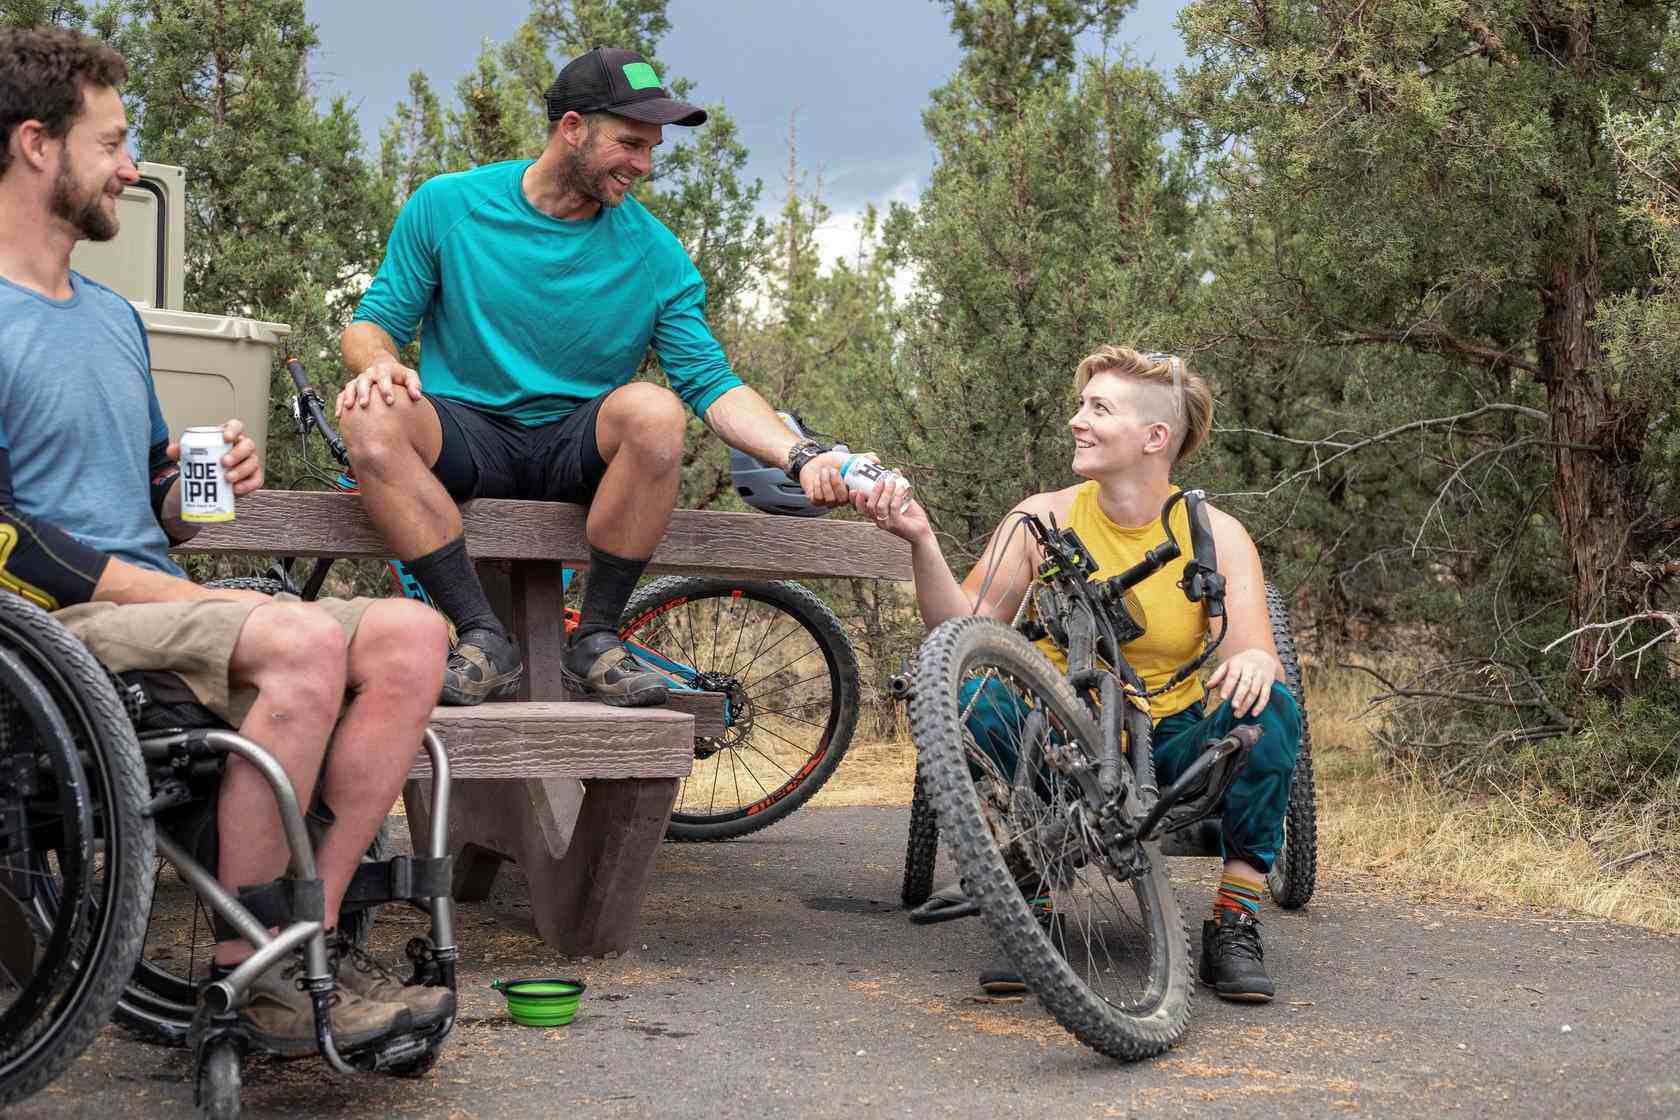 People with disabilities on bikes